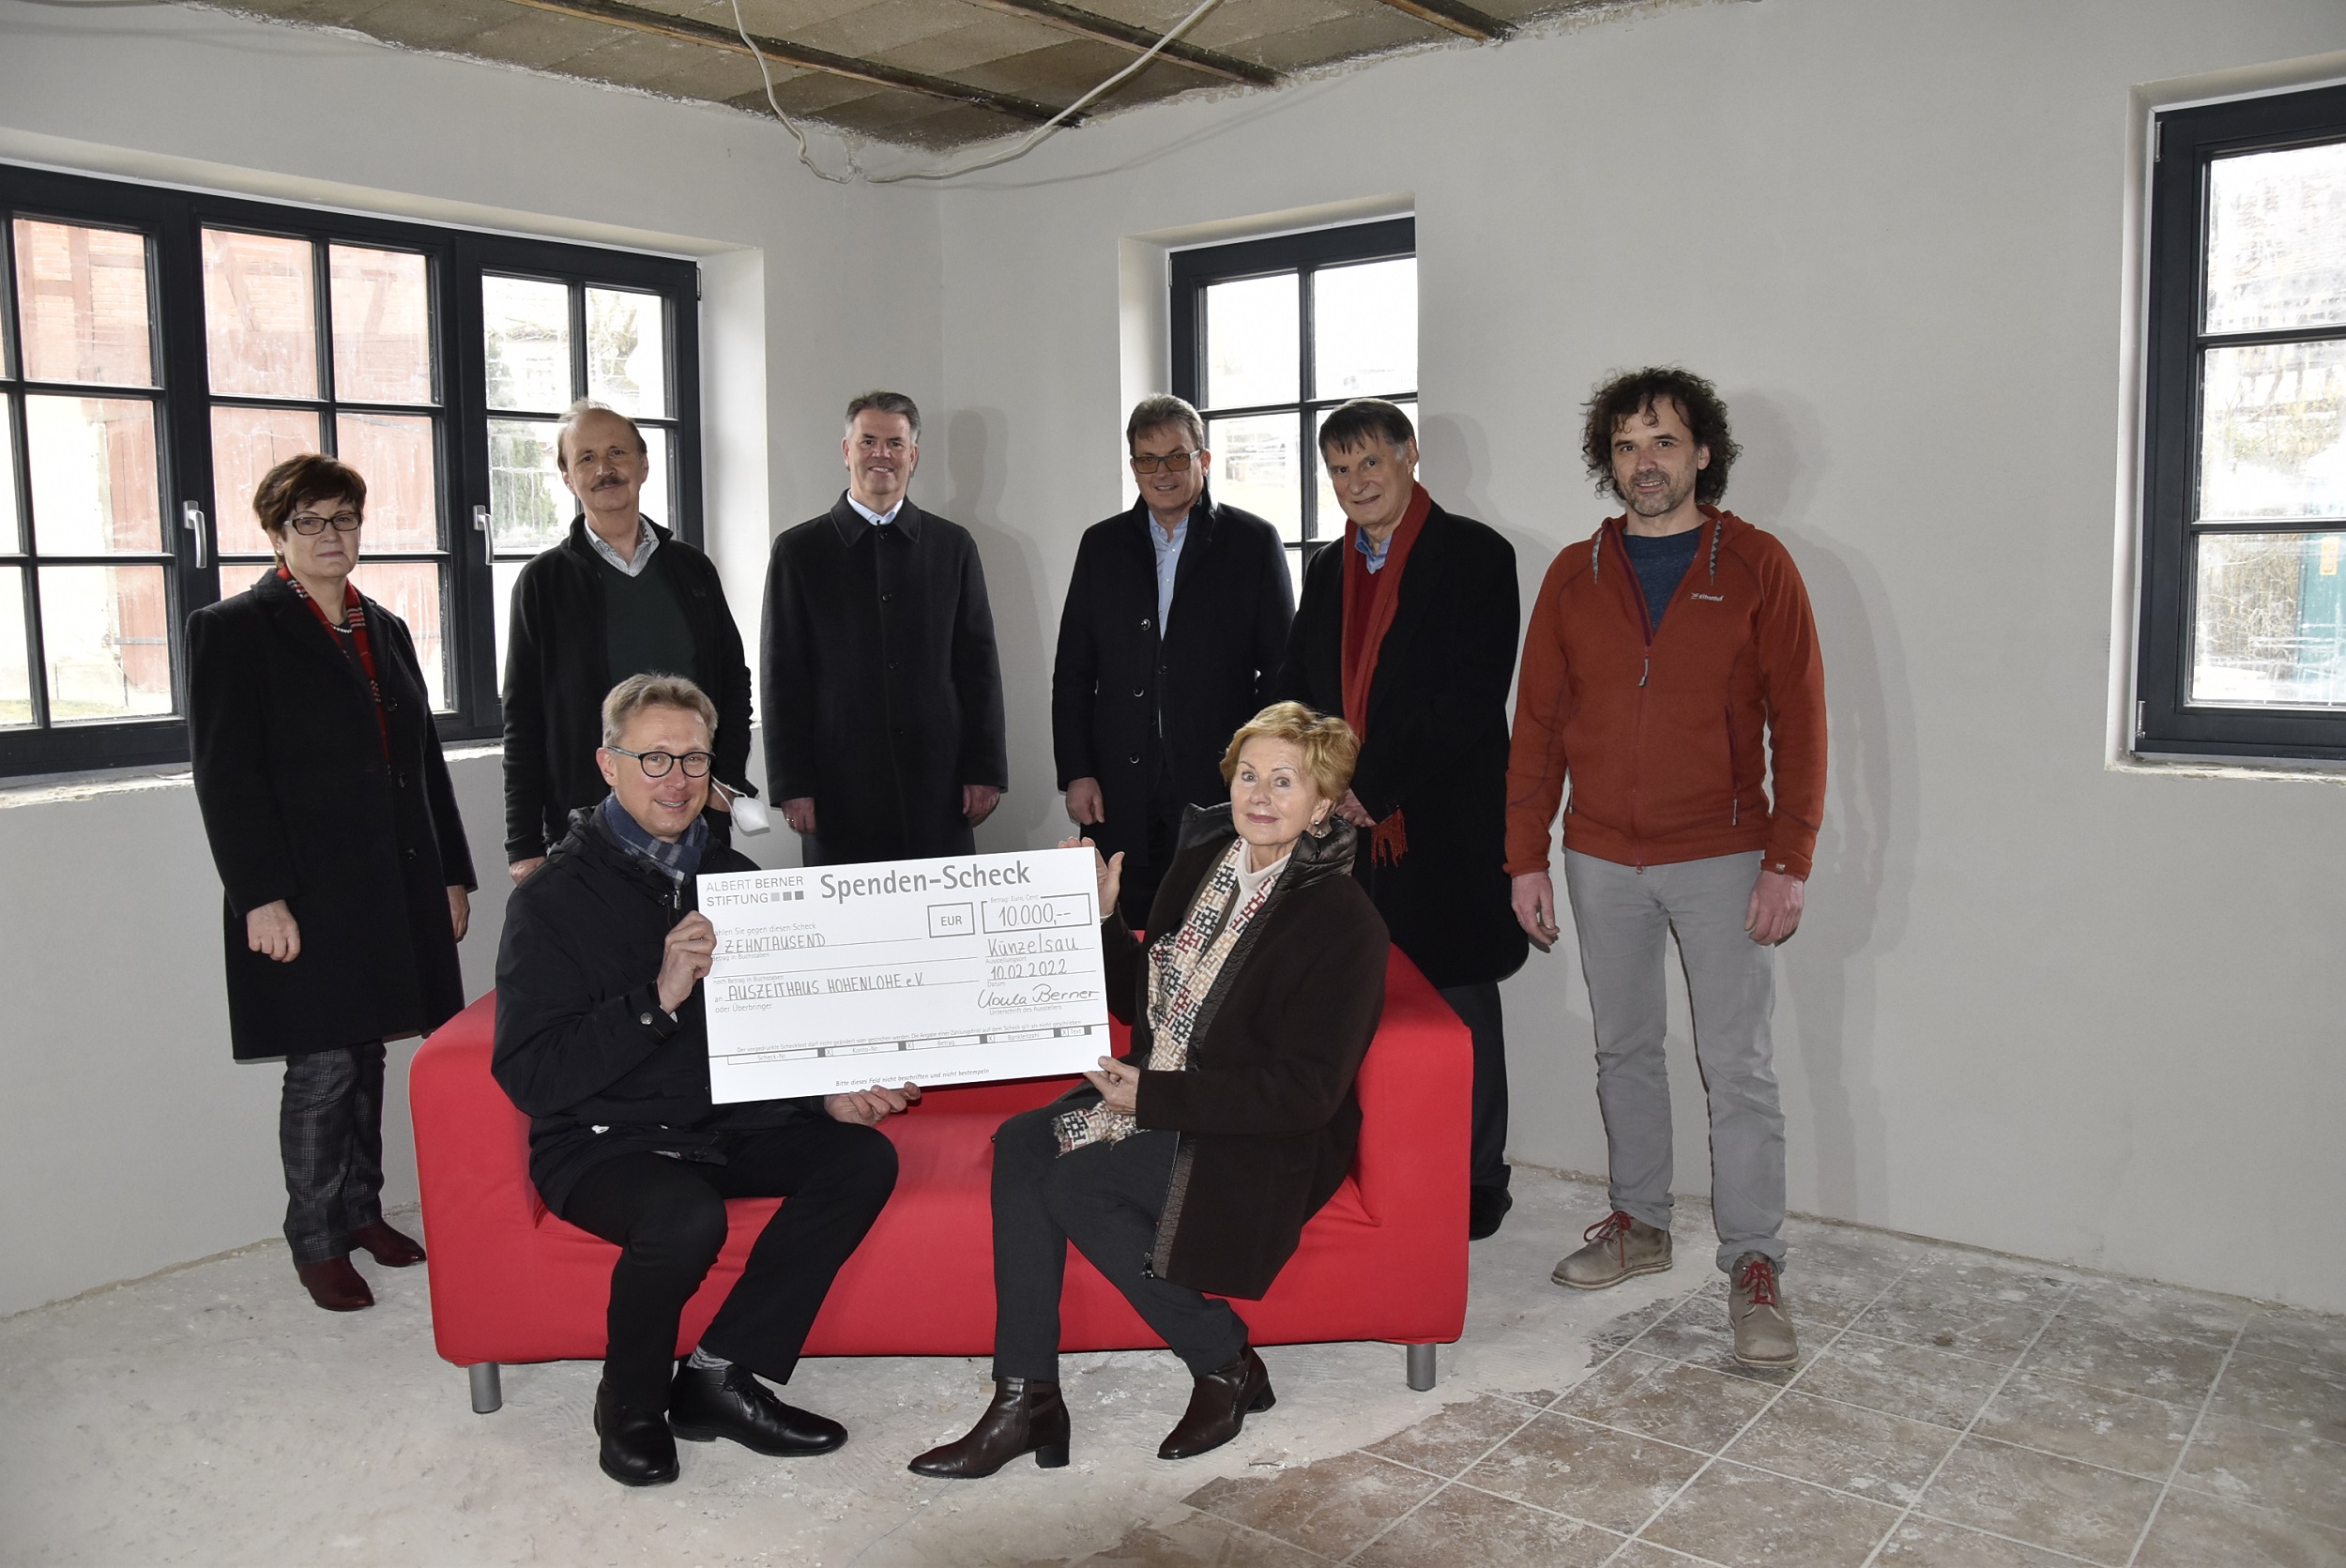 Time out instead of downtime: Generous donation supports new help facility for burnoutprone people 